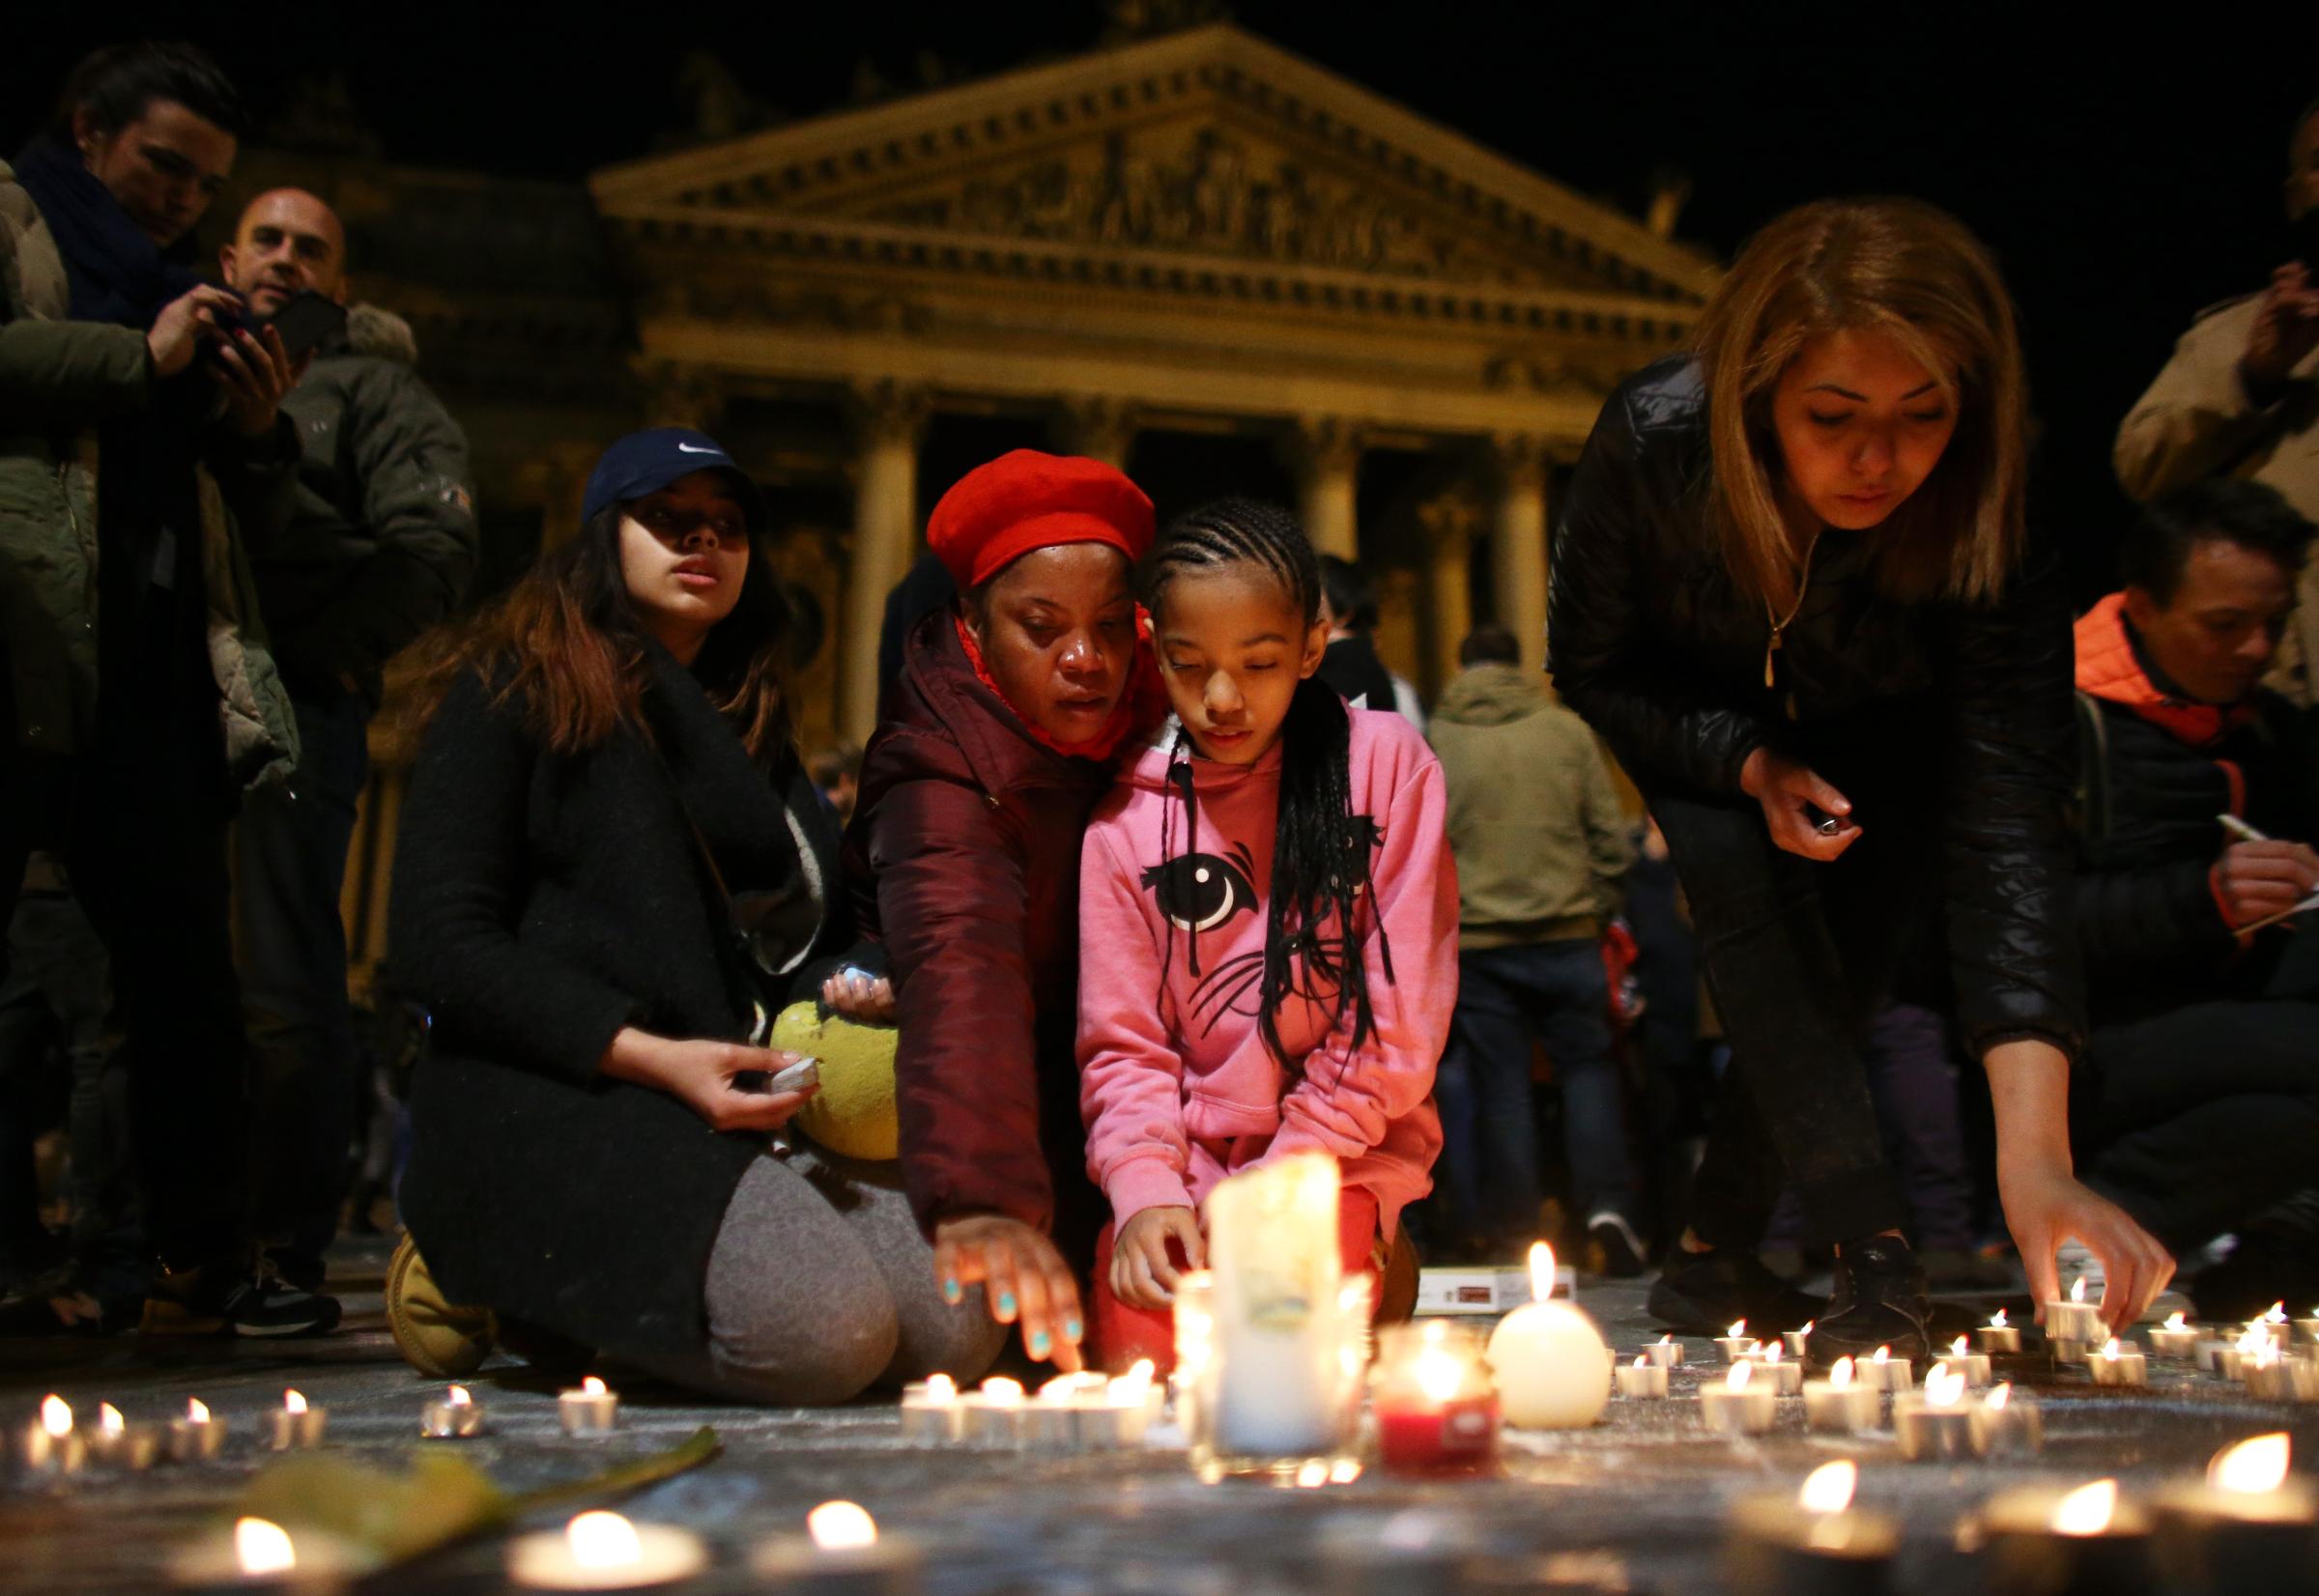 A young girl lights a candle at the Place de la Bourse following the attacks on March 22, 2016 in Brussels, Belgium.